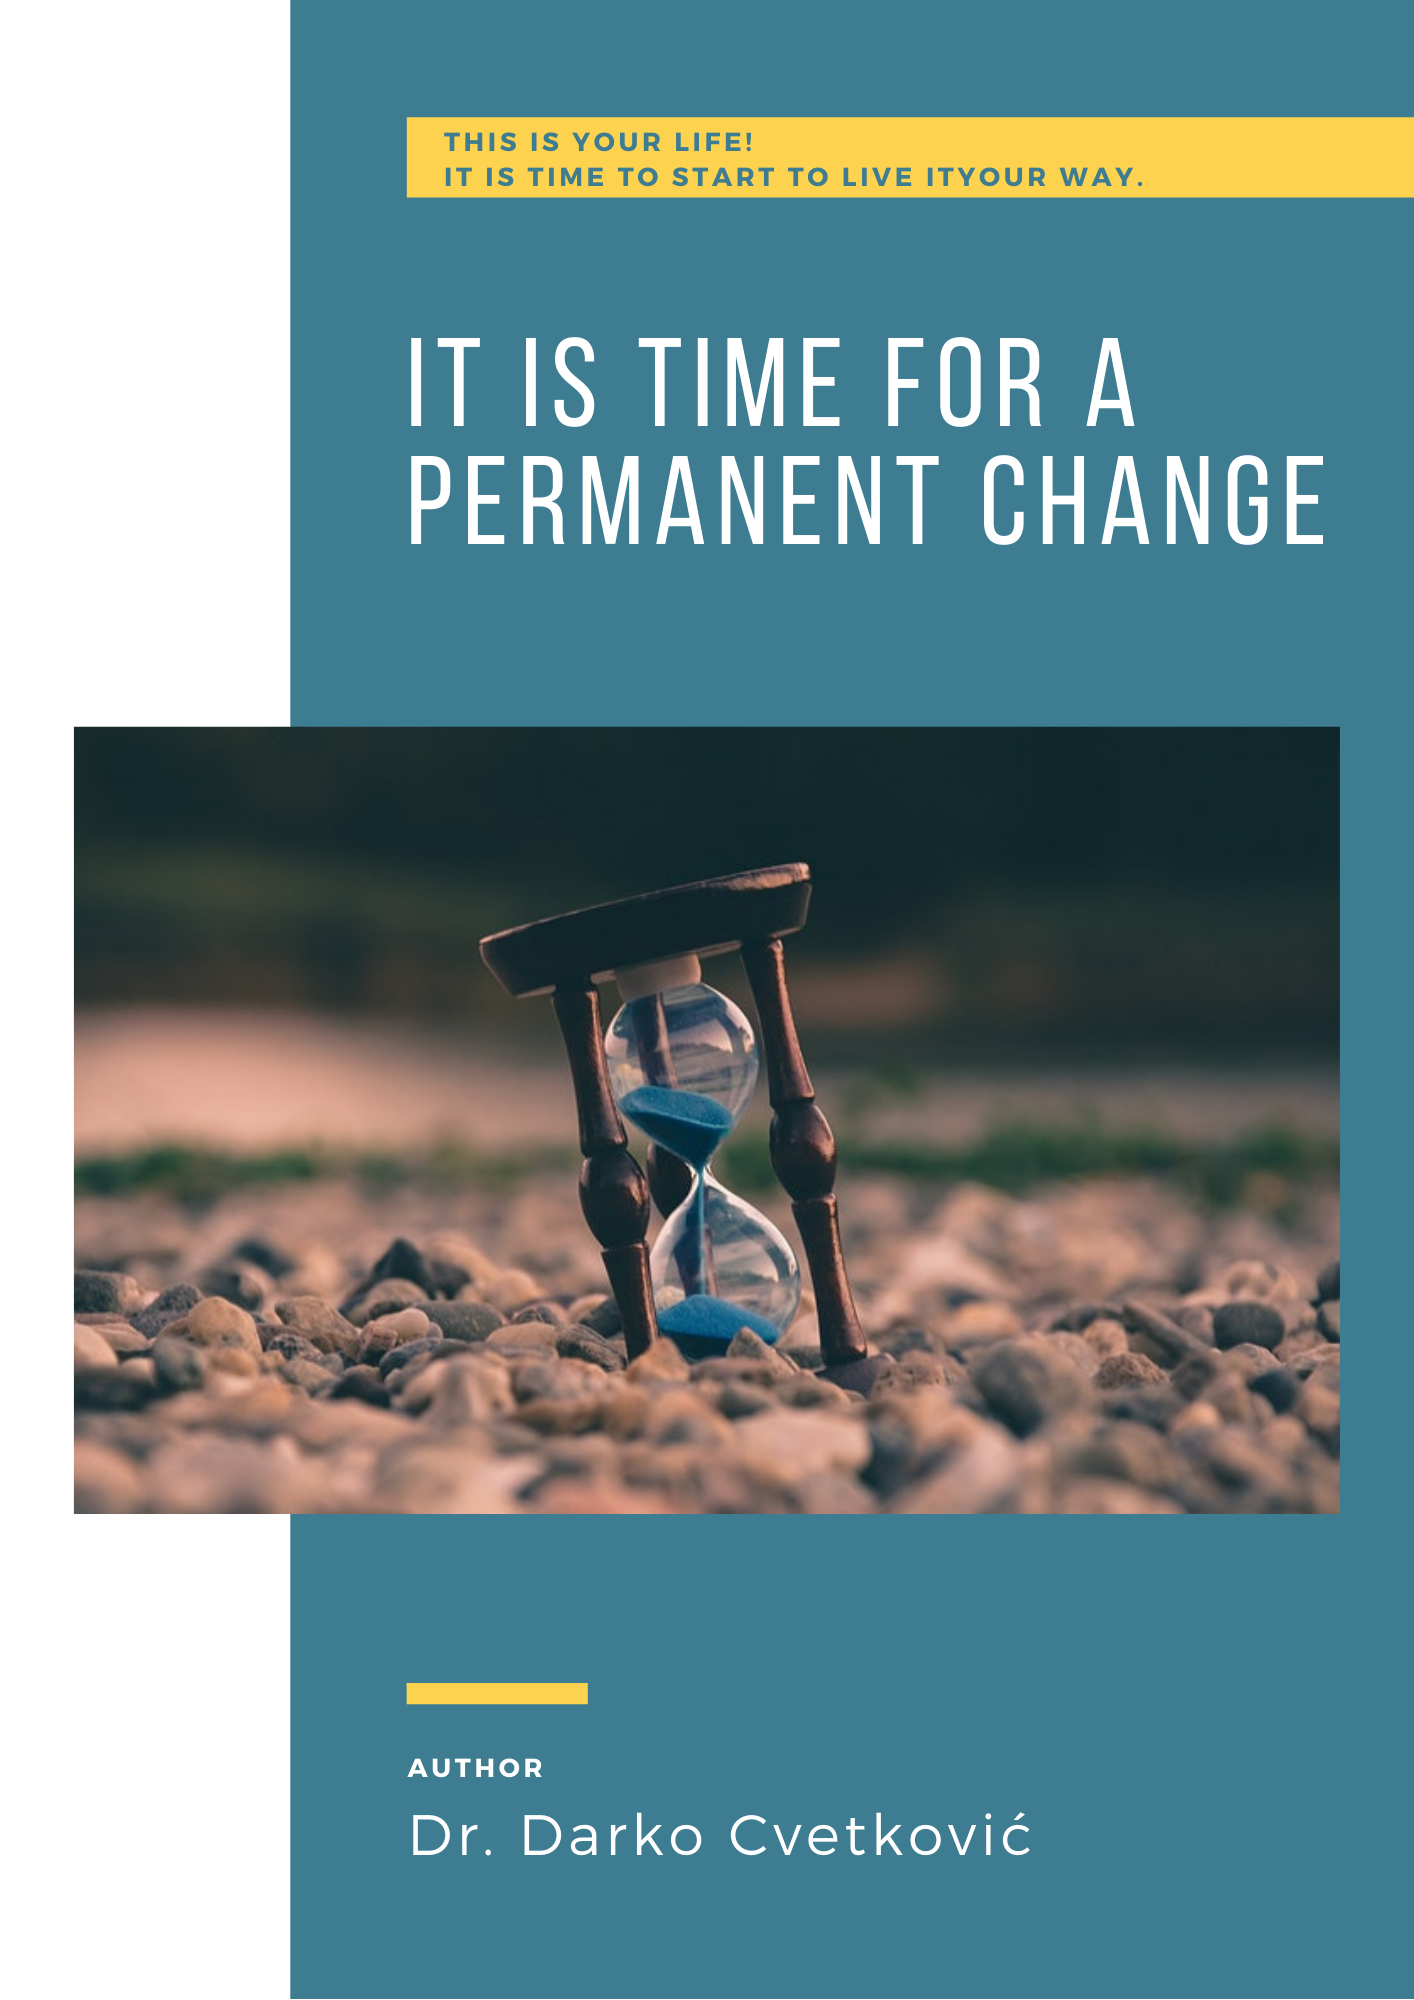 Copy of It is time for a permanent change